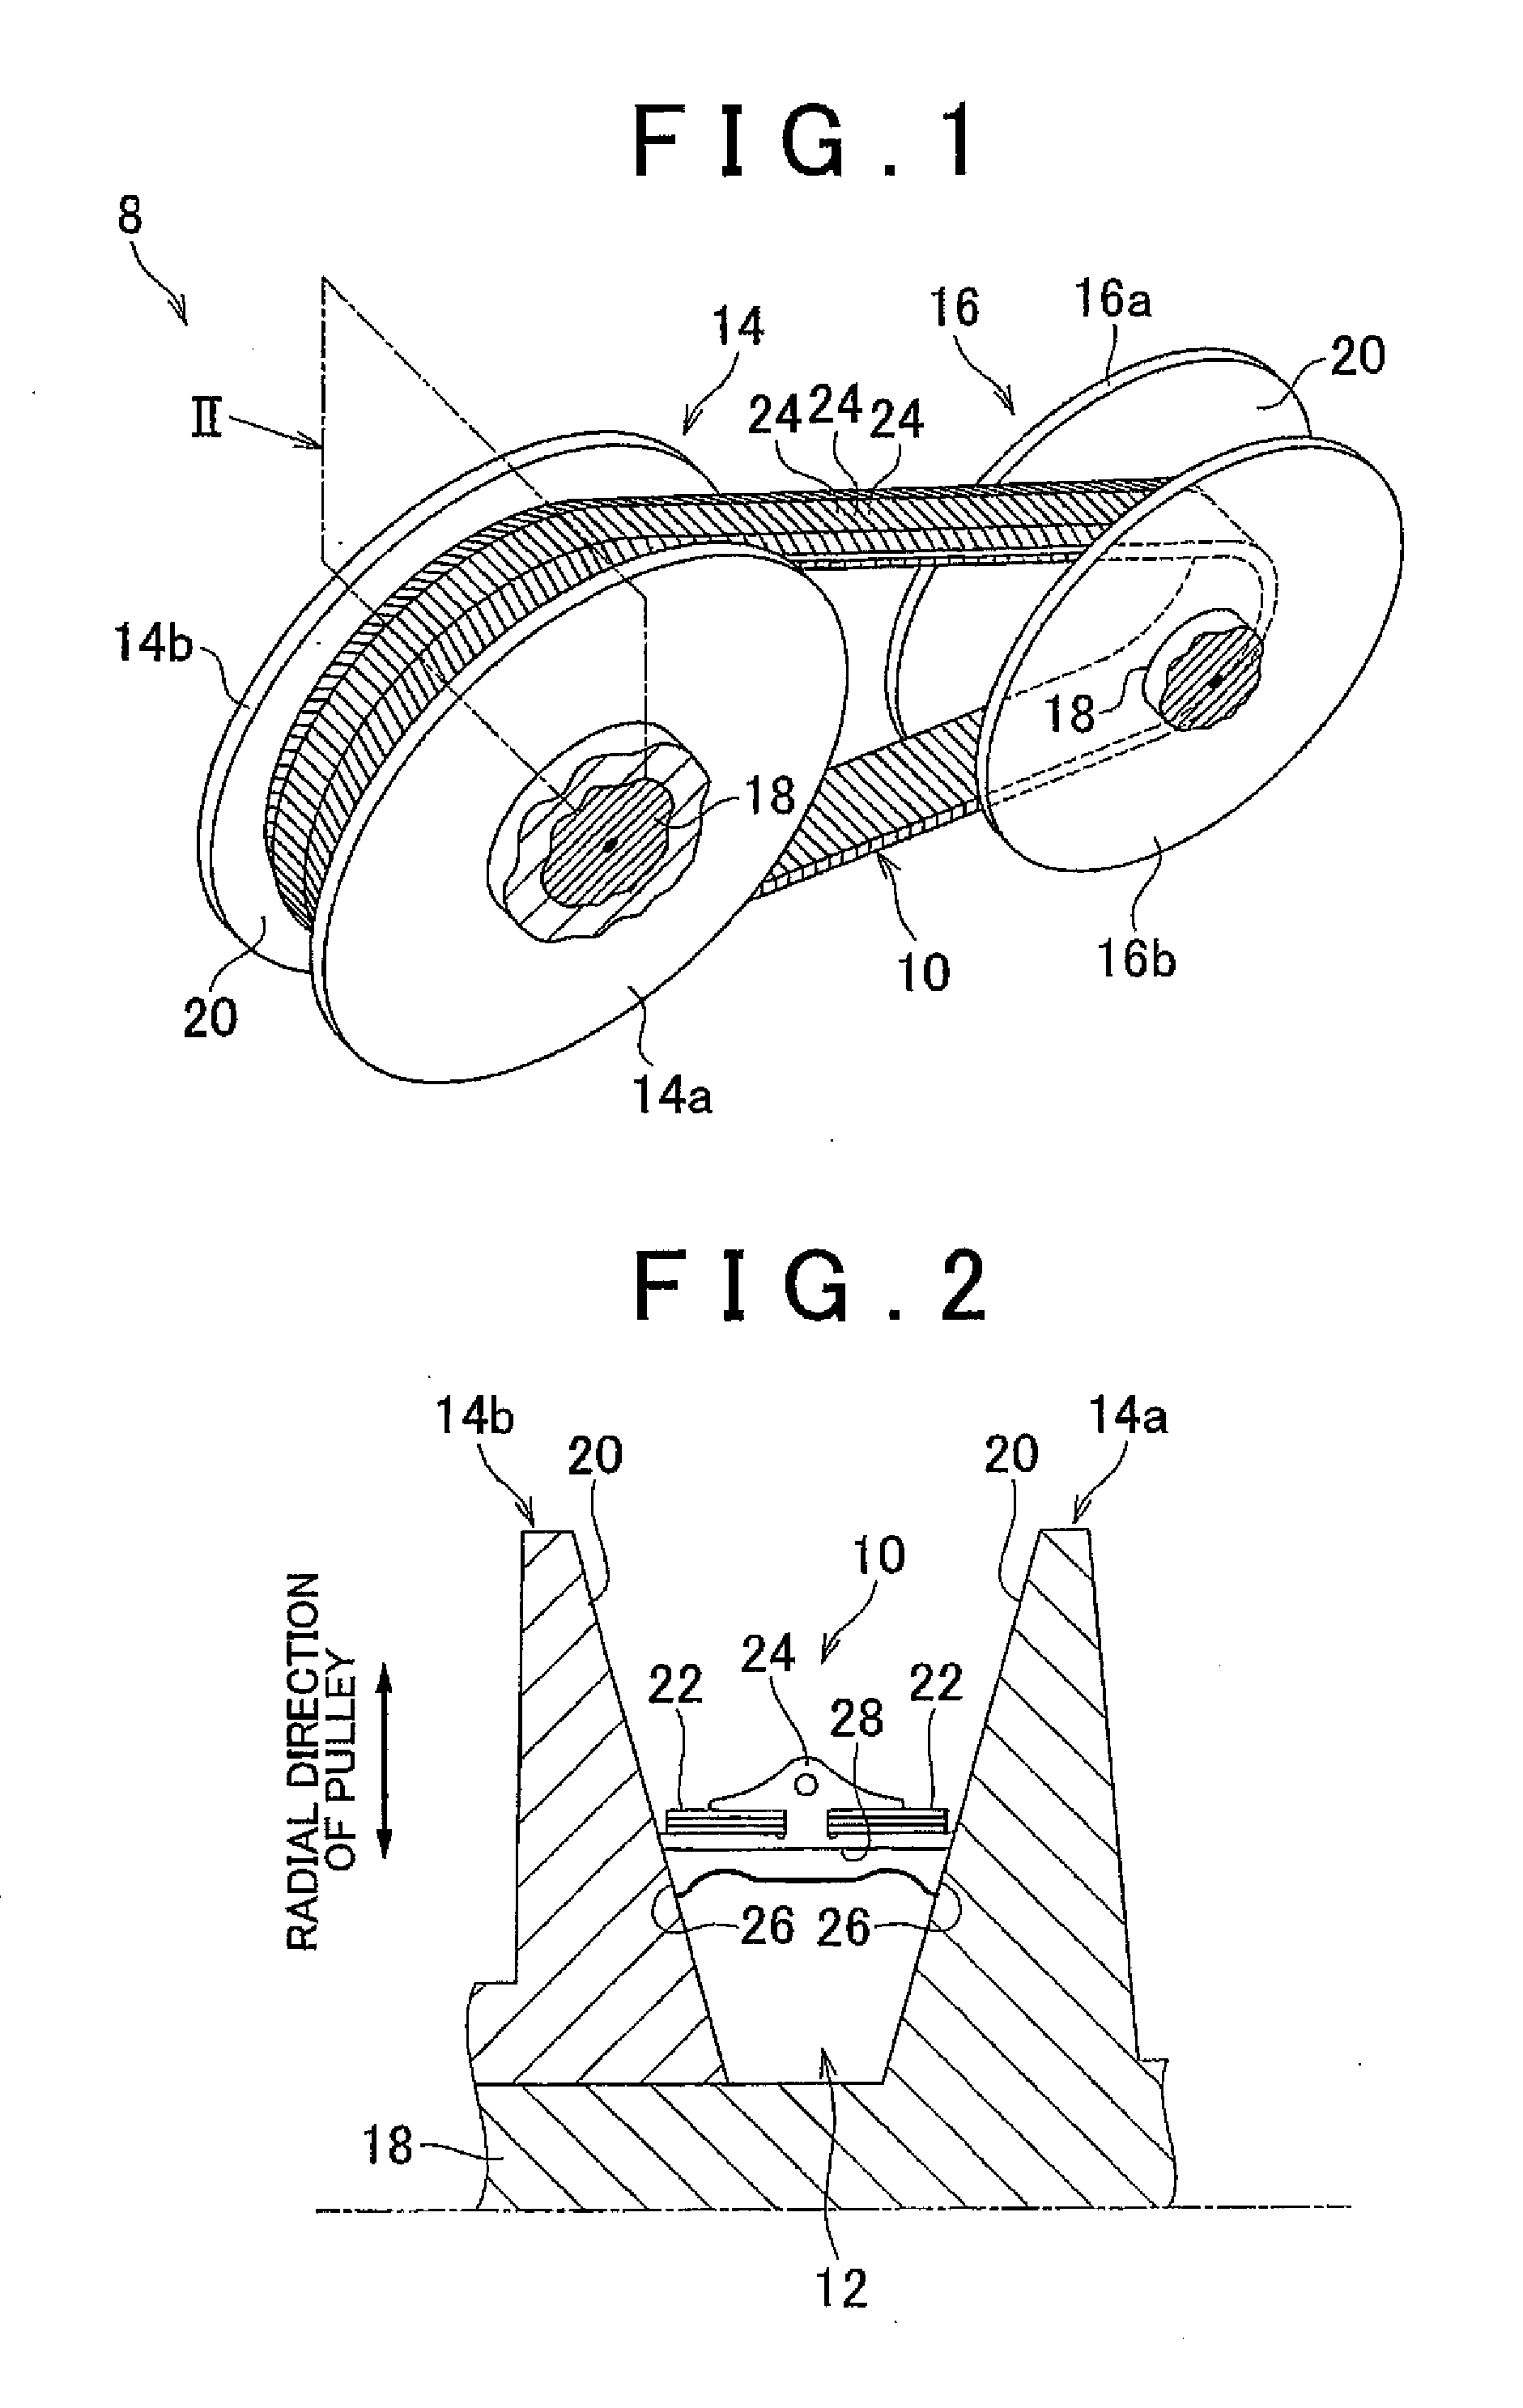 Elements of drive power transfer belt of belt-drive continuously variable transmission for vehicle